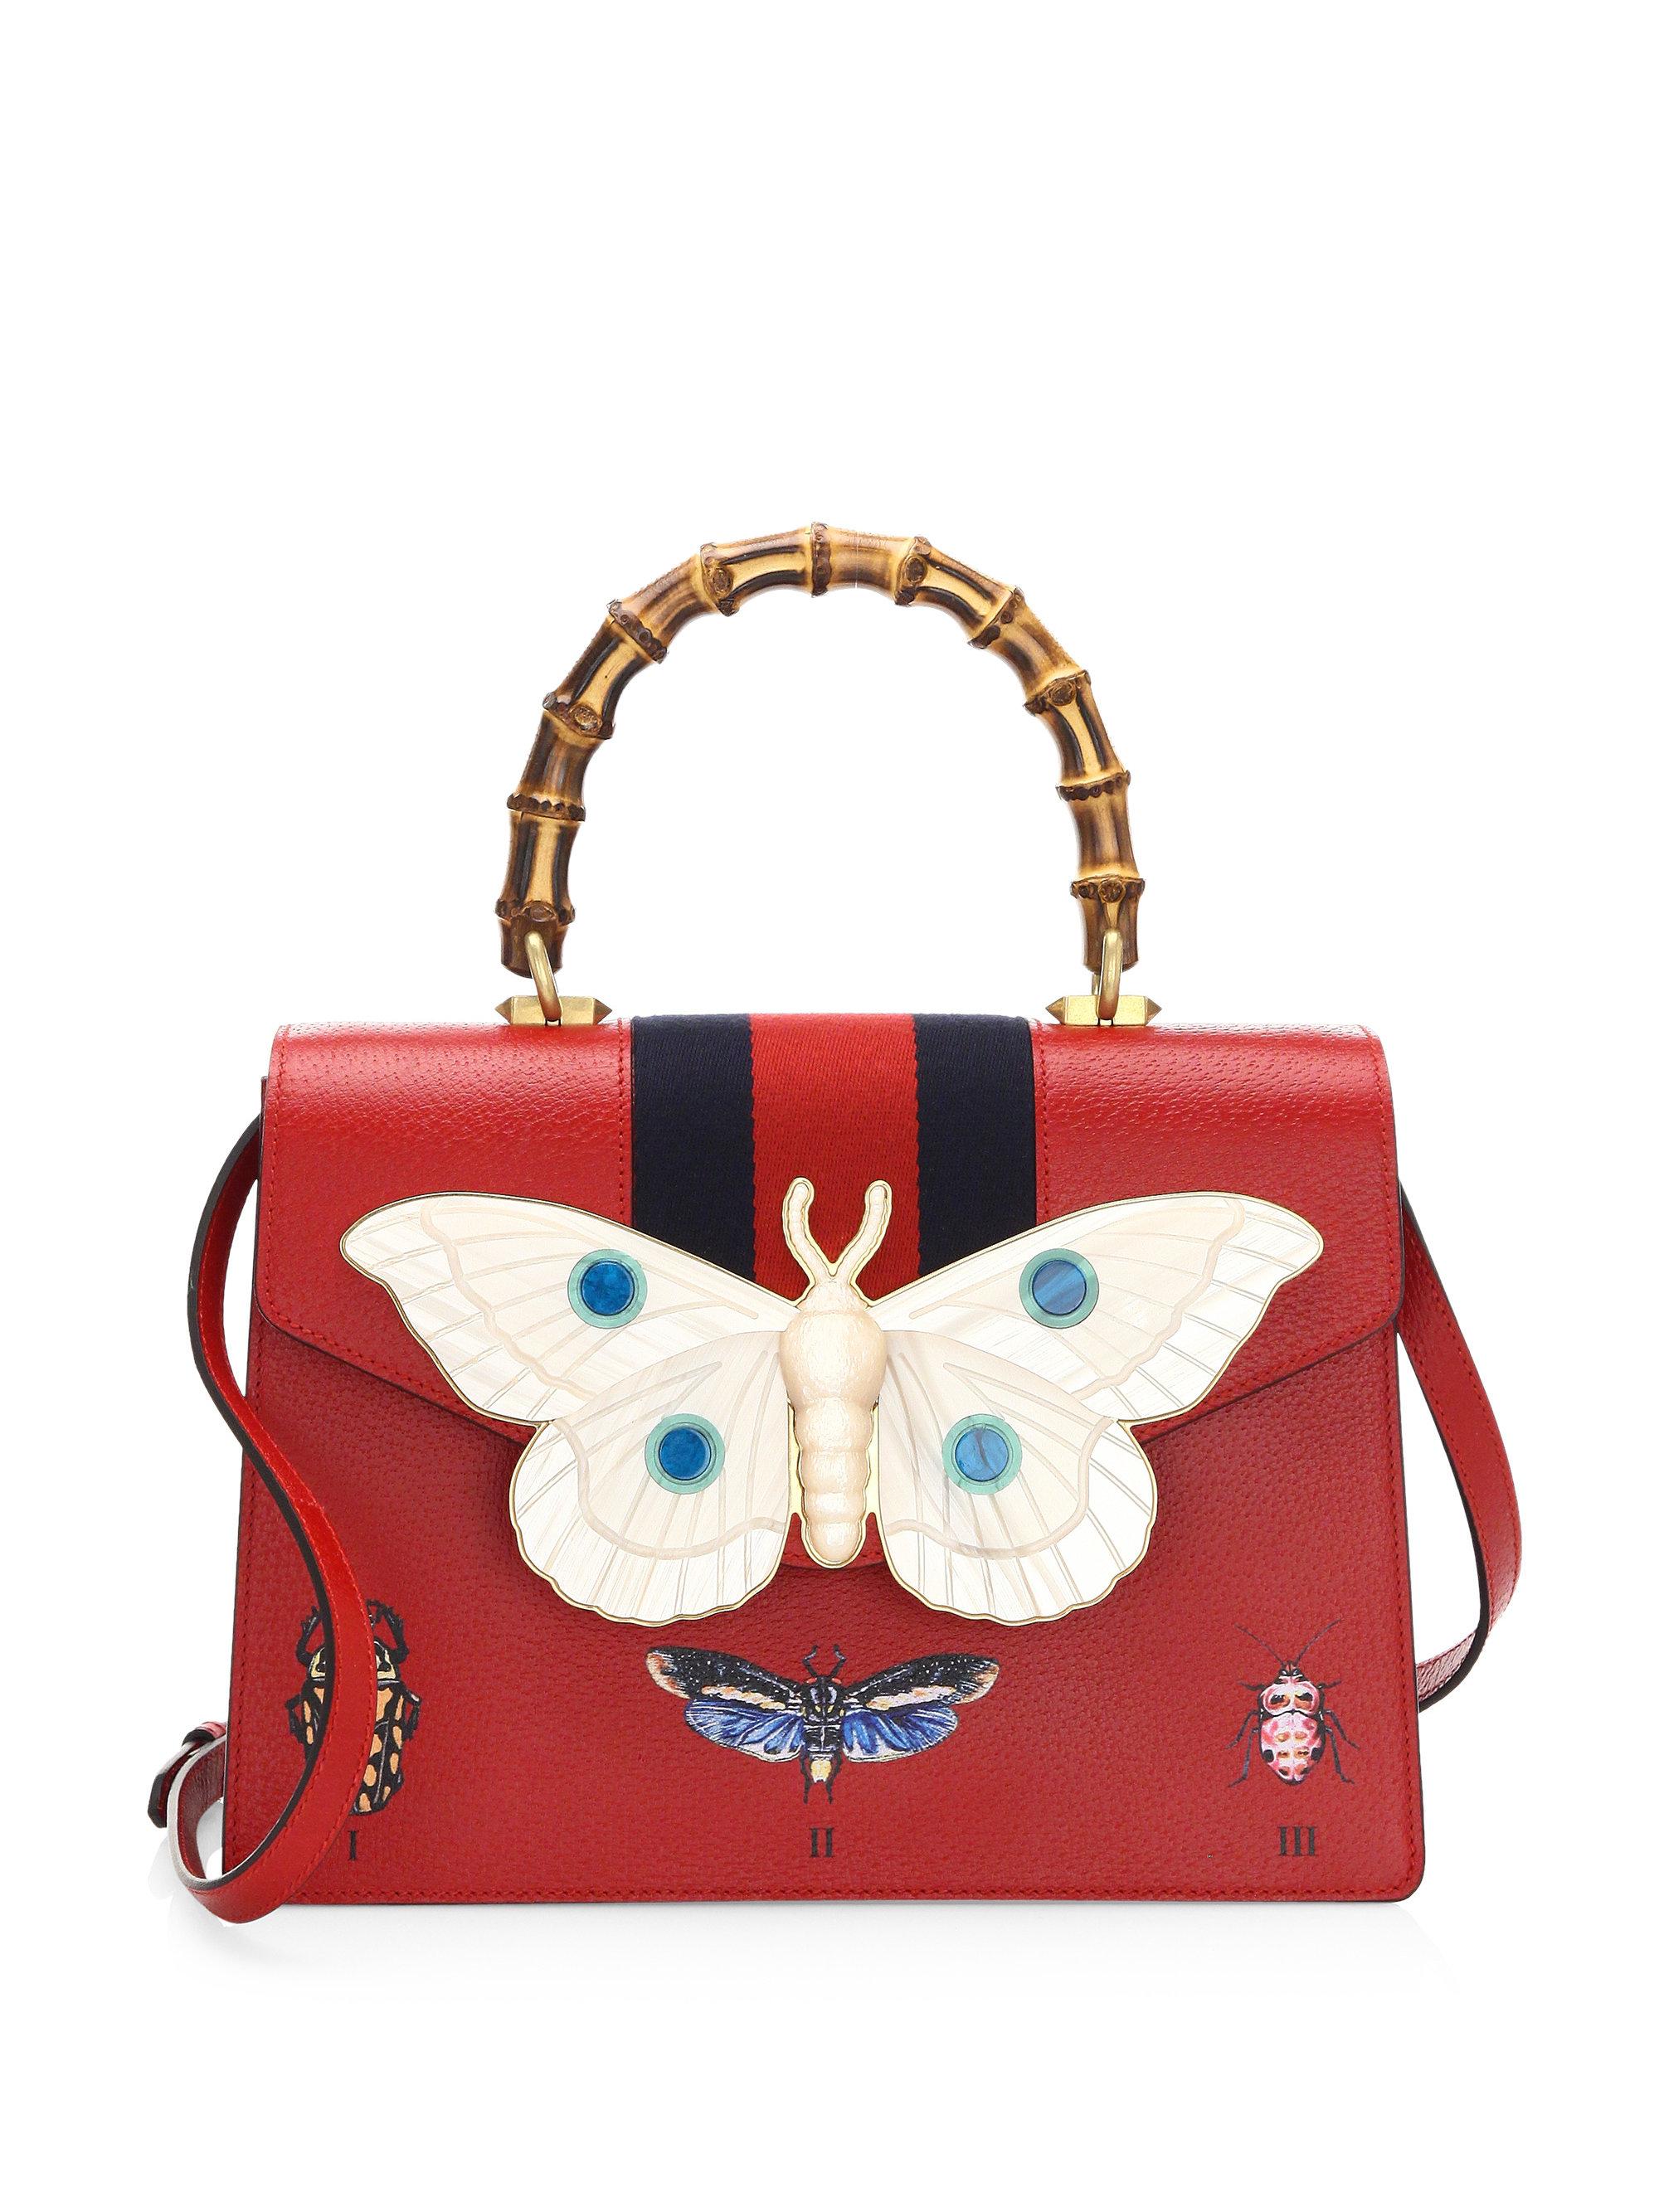 Gucci Butterfly Leather Handbag in Red - Lyst